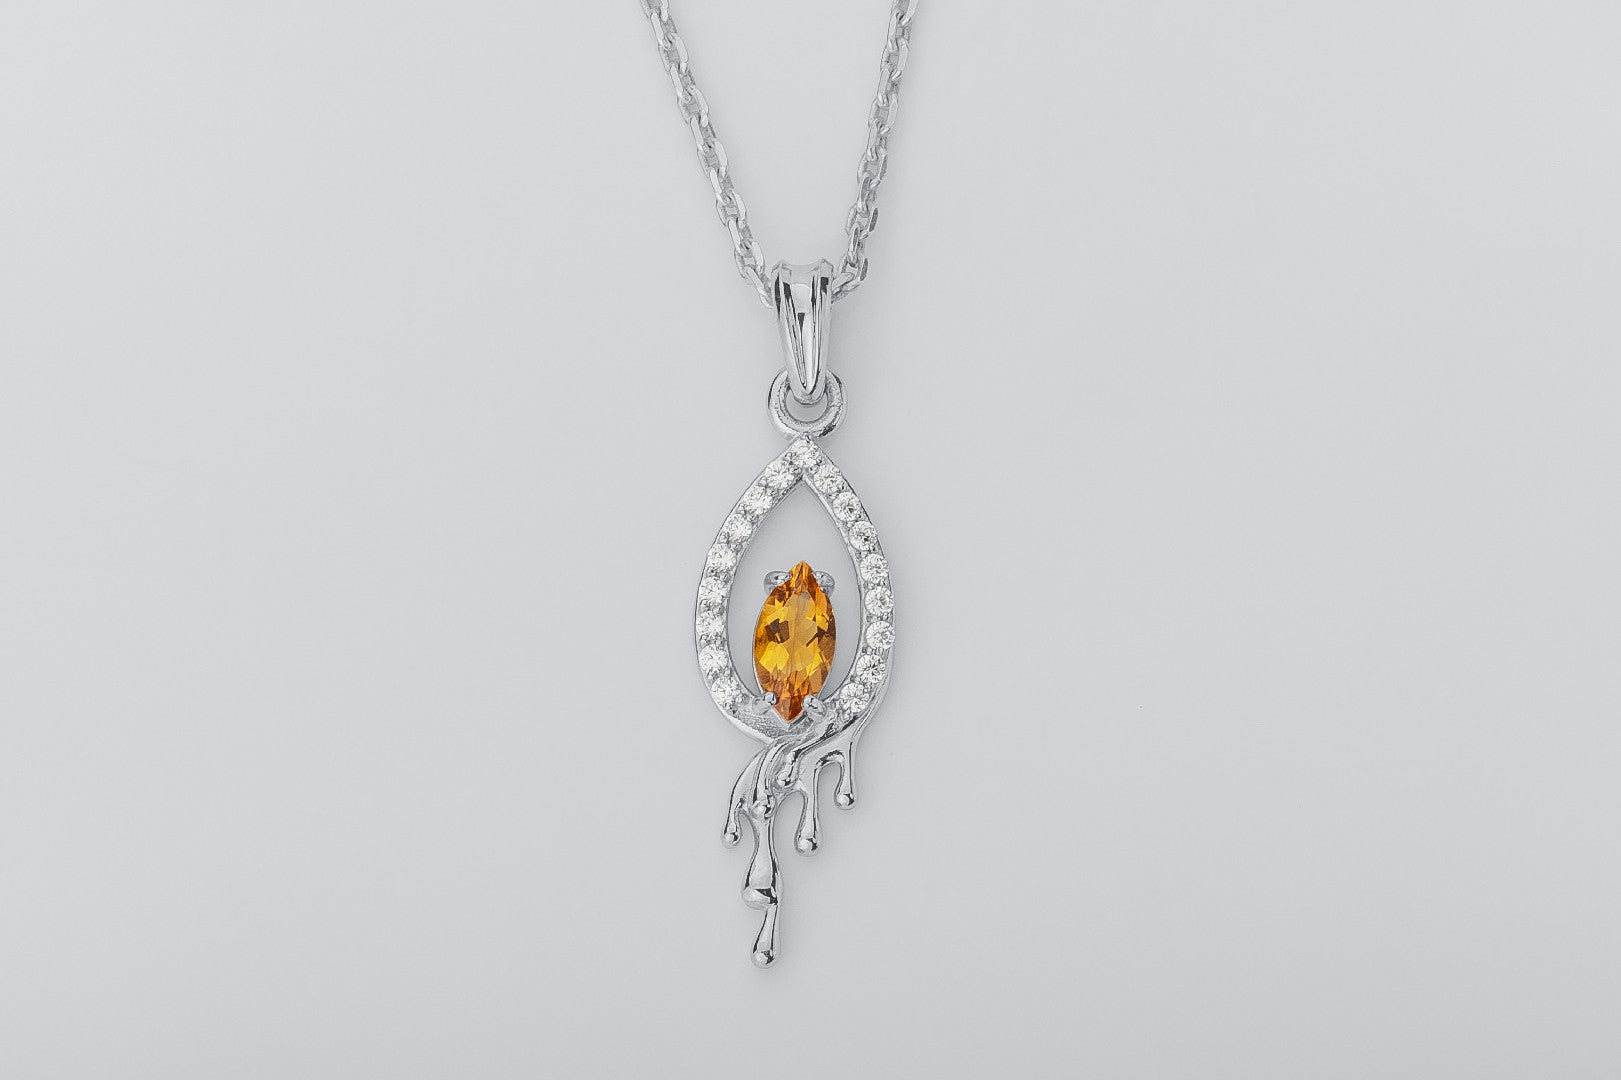 Candle Flame Citrine Pendant with wax Droplets, Rhodium plated 925 silver